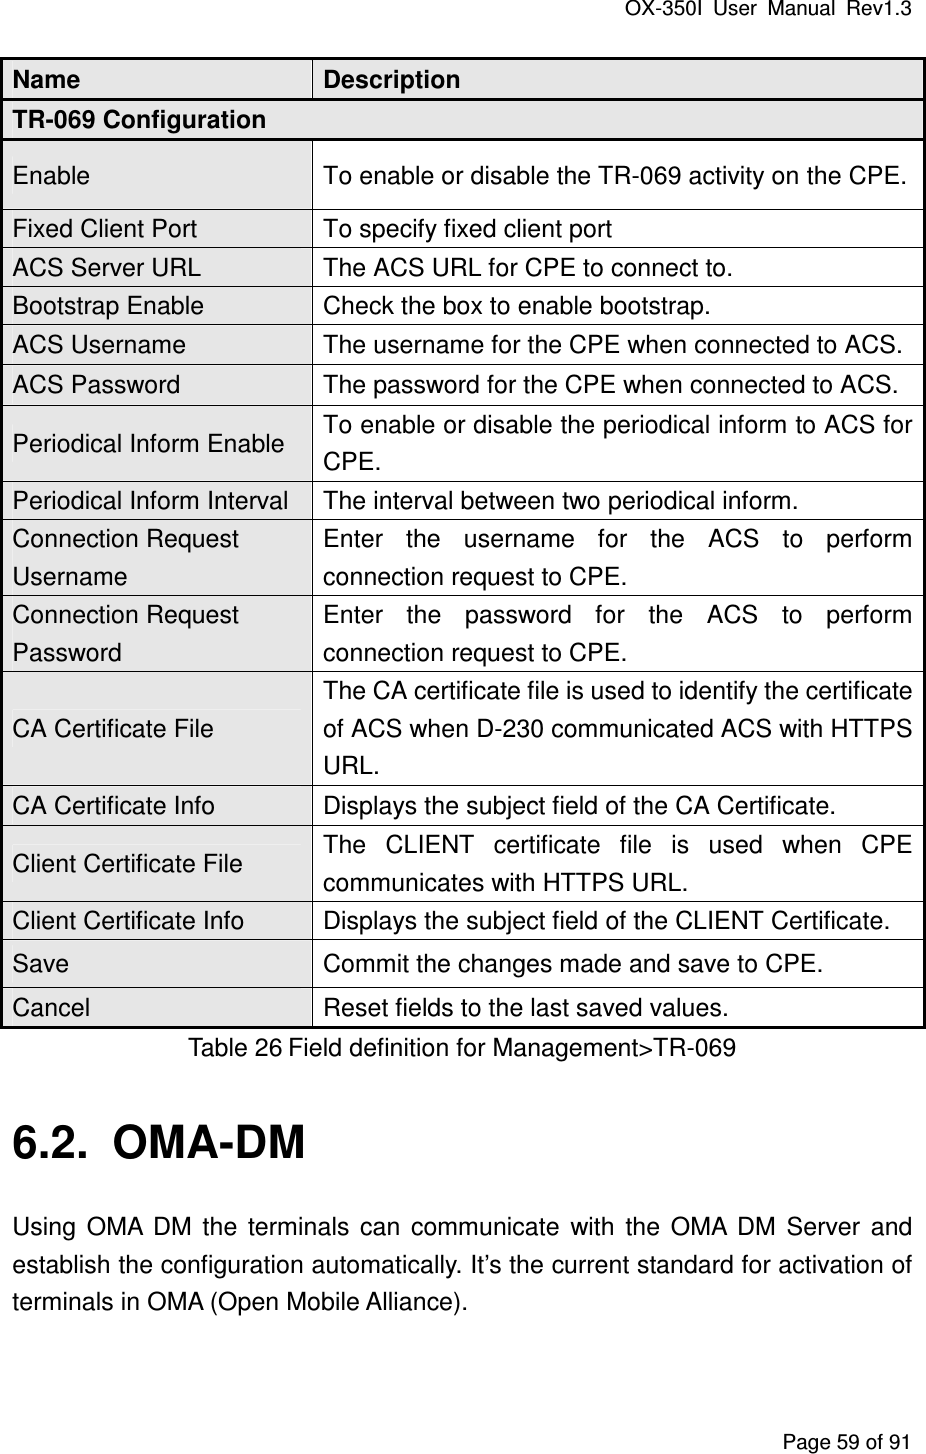 OX-350I  User  Manual  Rev1.3 Page 59 of 91 Name  Description TR-069 Configuration Enable  To enable or disable the TR-069 activity on the CPE. Fixed Client Port  To specify fixed client port ACS Server URL  The ACS URL for CPE to connect to. Bootstrap Enable  Check the box to enable bootstrap. ACS Username  The username for the CPE when connected to ACS. ACS Password  The password for the CPE when connected to ACS. Periodical Inform Enable  To enable or disable the periodical inform to ACS for CPE. Periodical Inform Interval  The interval between two periodical inform. Connection Request Username Enter  the  username  for  the  ACS  to  perform connection request to CPE. Connection Request Password Enter  the  password  for  the  ACS  to  perform connection request to CPE. CA Certificate File The CA certificate file is used to identify the certificate of ACS when D-230 communicated ACS with HTTPS URL. CA Certificate Info  Displays the subject field of the CA Certificate. Client Certificate File  The  CLIENT  certificate  file  is  used  when  CPE communicates with HTTPS URL. Client Certificate Info  Displays the subject field of the CLIENT Certificate. Save  Commit the changes made and save to CPE. Cancel  Reset fields to the last saved values. Table 26 Field definition for Management&gt;TR-069 6.2.  OMA-DM Using  OMA  DM  the  terminals  can  communicate  with  the  OMA  DM  Server  and establish the configuration automatically. It’s the current standard for activation of terminals in OMA (Open Mobile Alliance). 